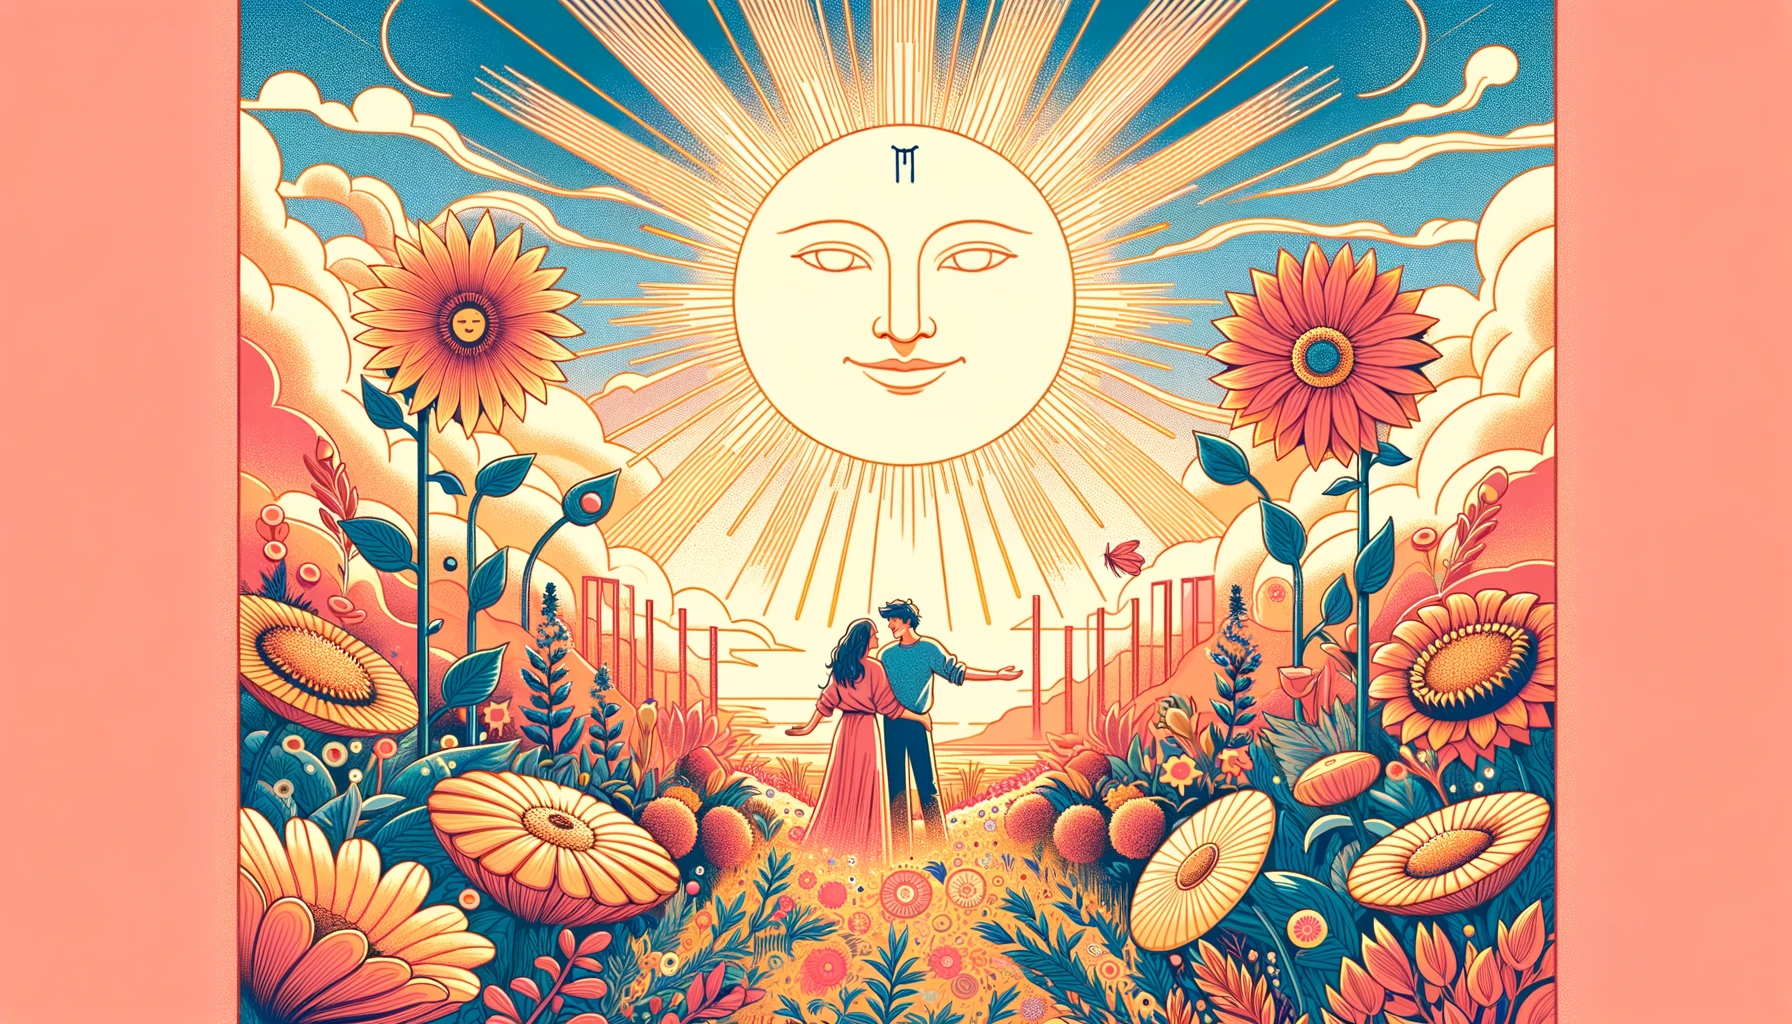 "Illustration symbolizing joy, success, and blossoming love with 'The Sun' Tarot card. Sets a radiant tone for your article, discussing positive outcomes in love, highlighting fulfillment, happiness, and the celebration of harmonious relationships."